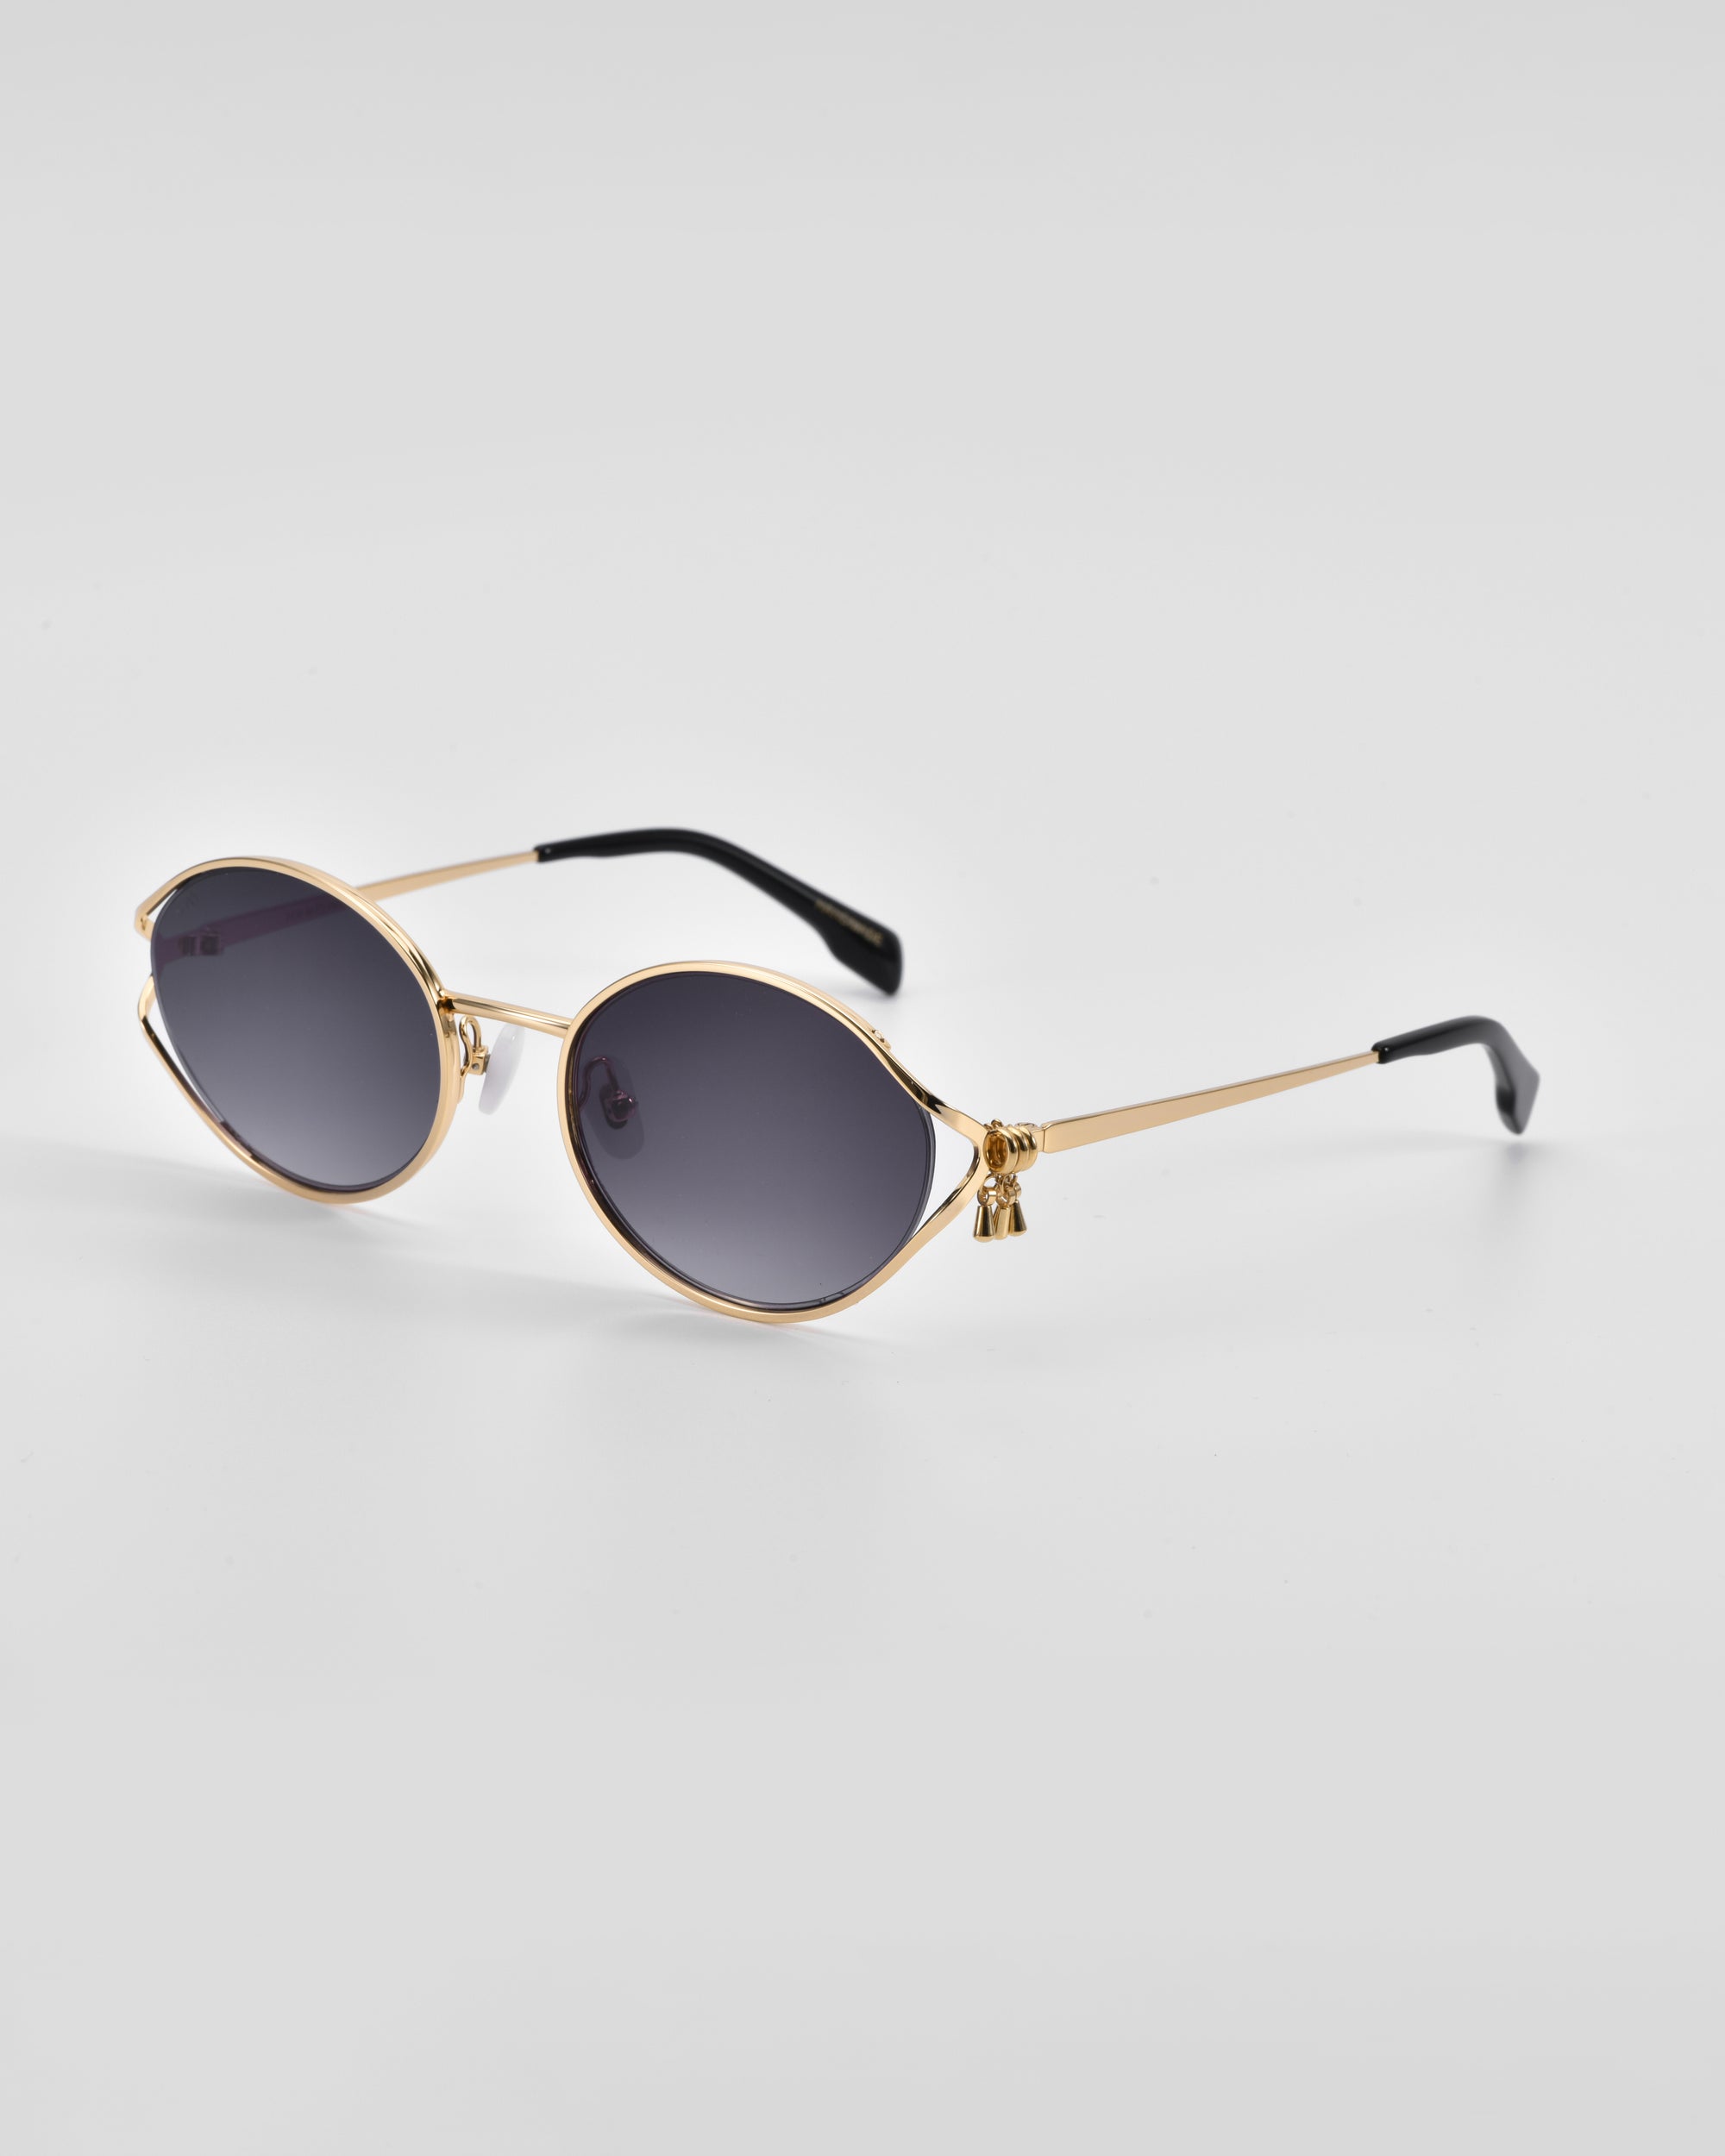 A pair of stylish For Art&#39;s Sake® Sky sunglasses with golden metal frames and dark, oval lenses. The temples have black tips, providing a contrast against the 18-karat gold. The natural jade-stone nose pads add an extra touch of luxury. The background is a clean white surface, highlighting the elegant design of the sunglasses.